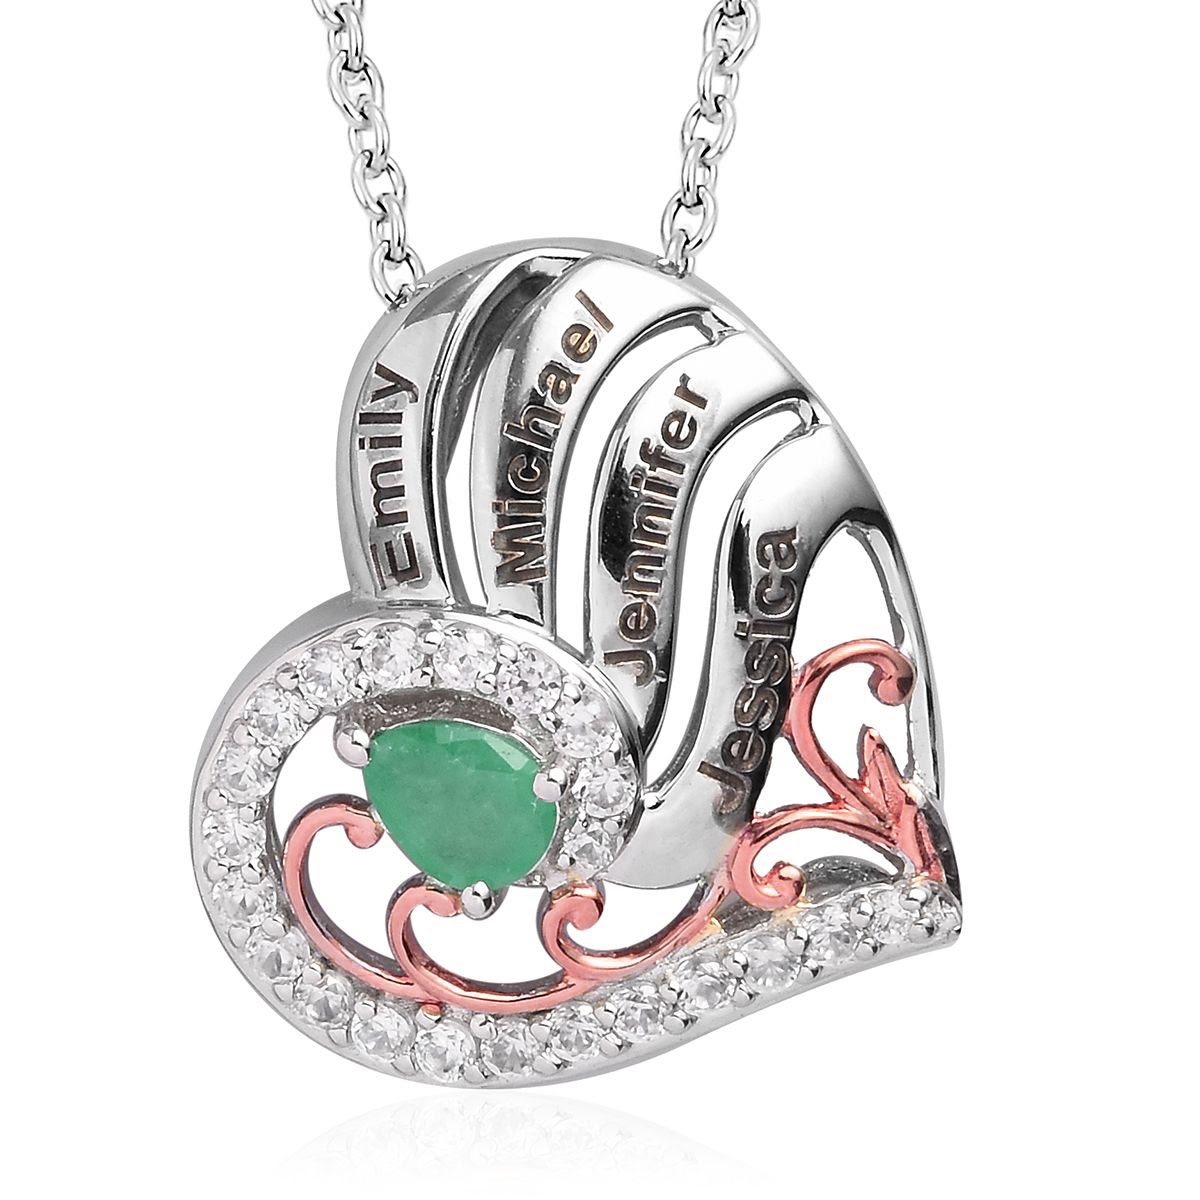 Jewelry Gifts to Surprise Your Mother-in-Law